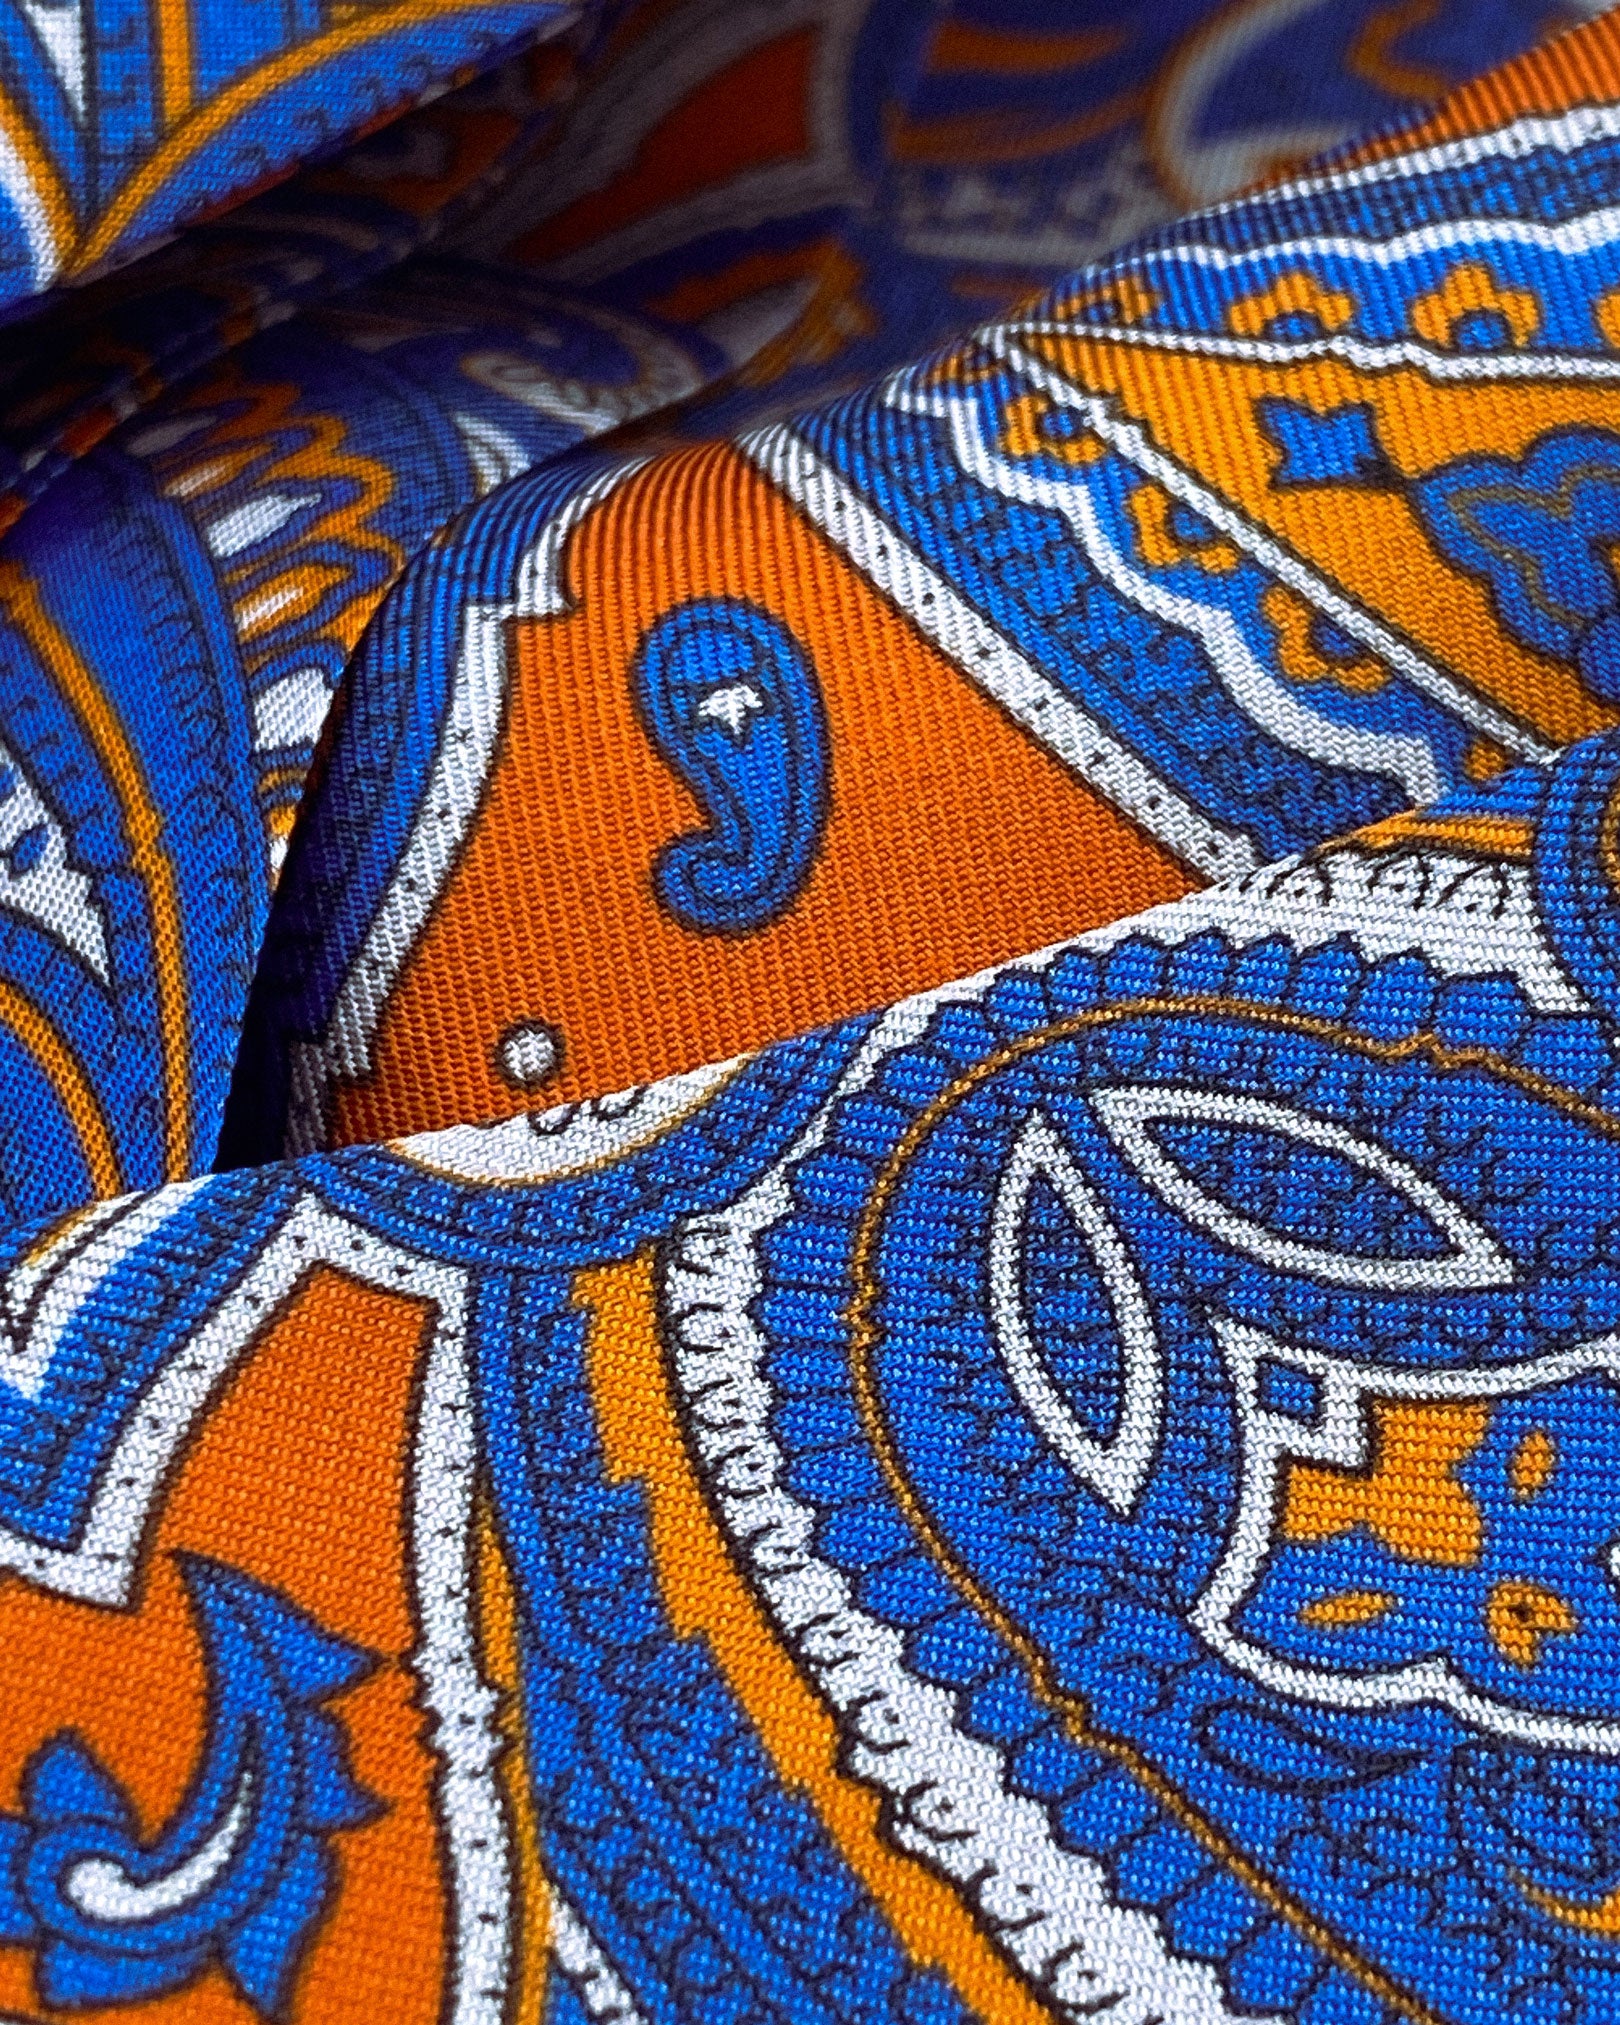 Angled and ruffled close-up view of the blue and orange paisley patterns of the silk Orlando Aviator.